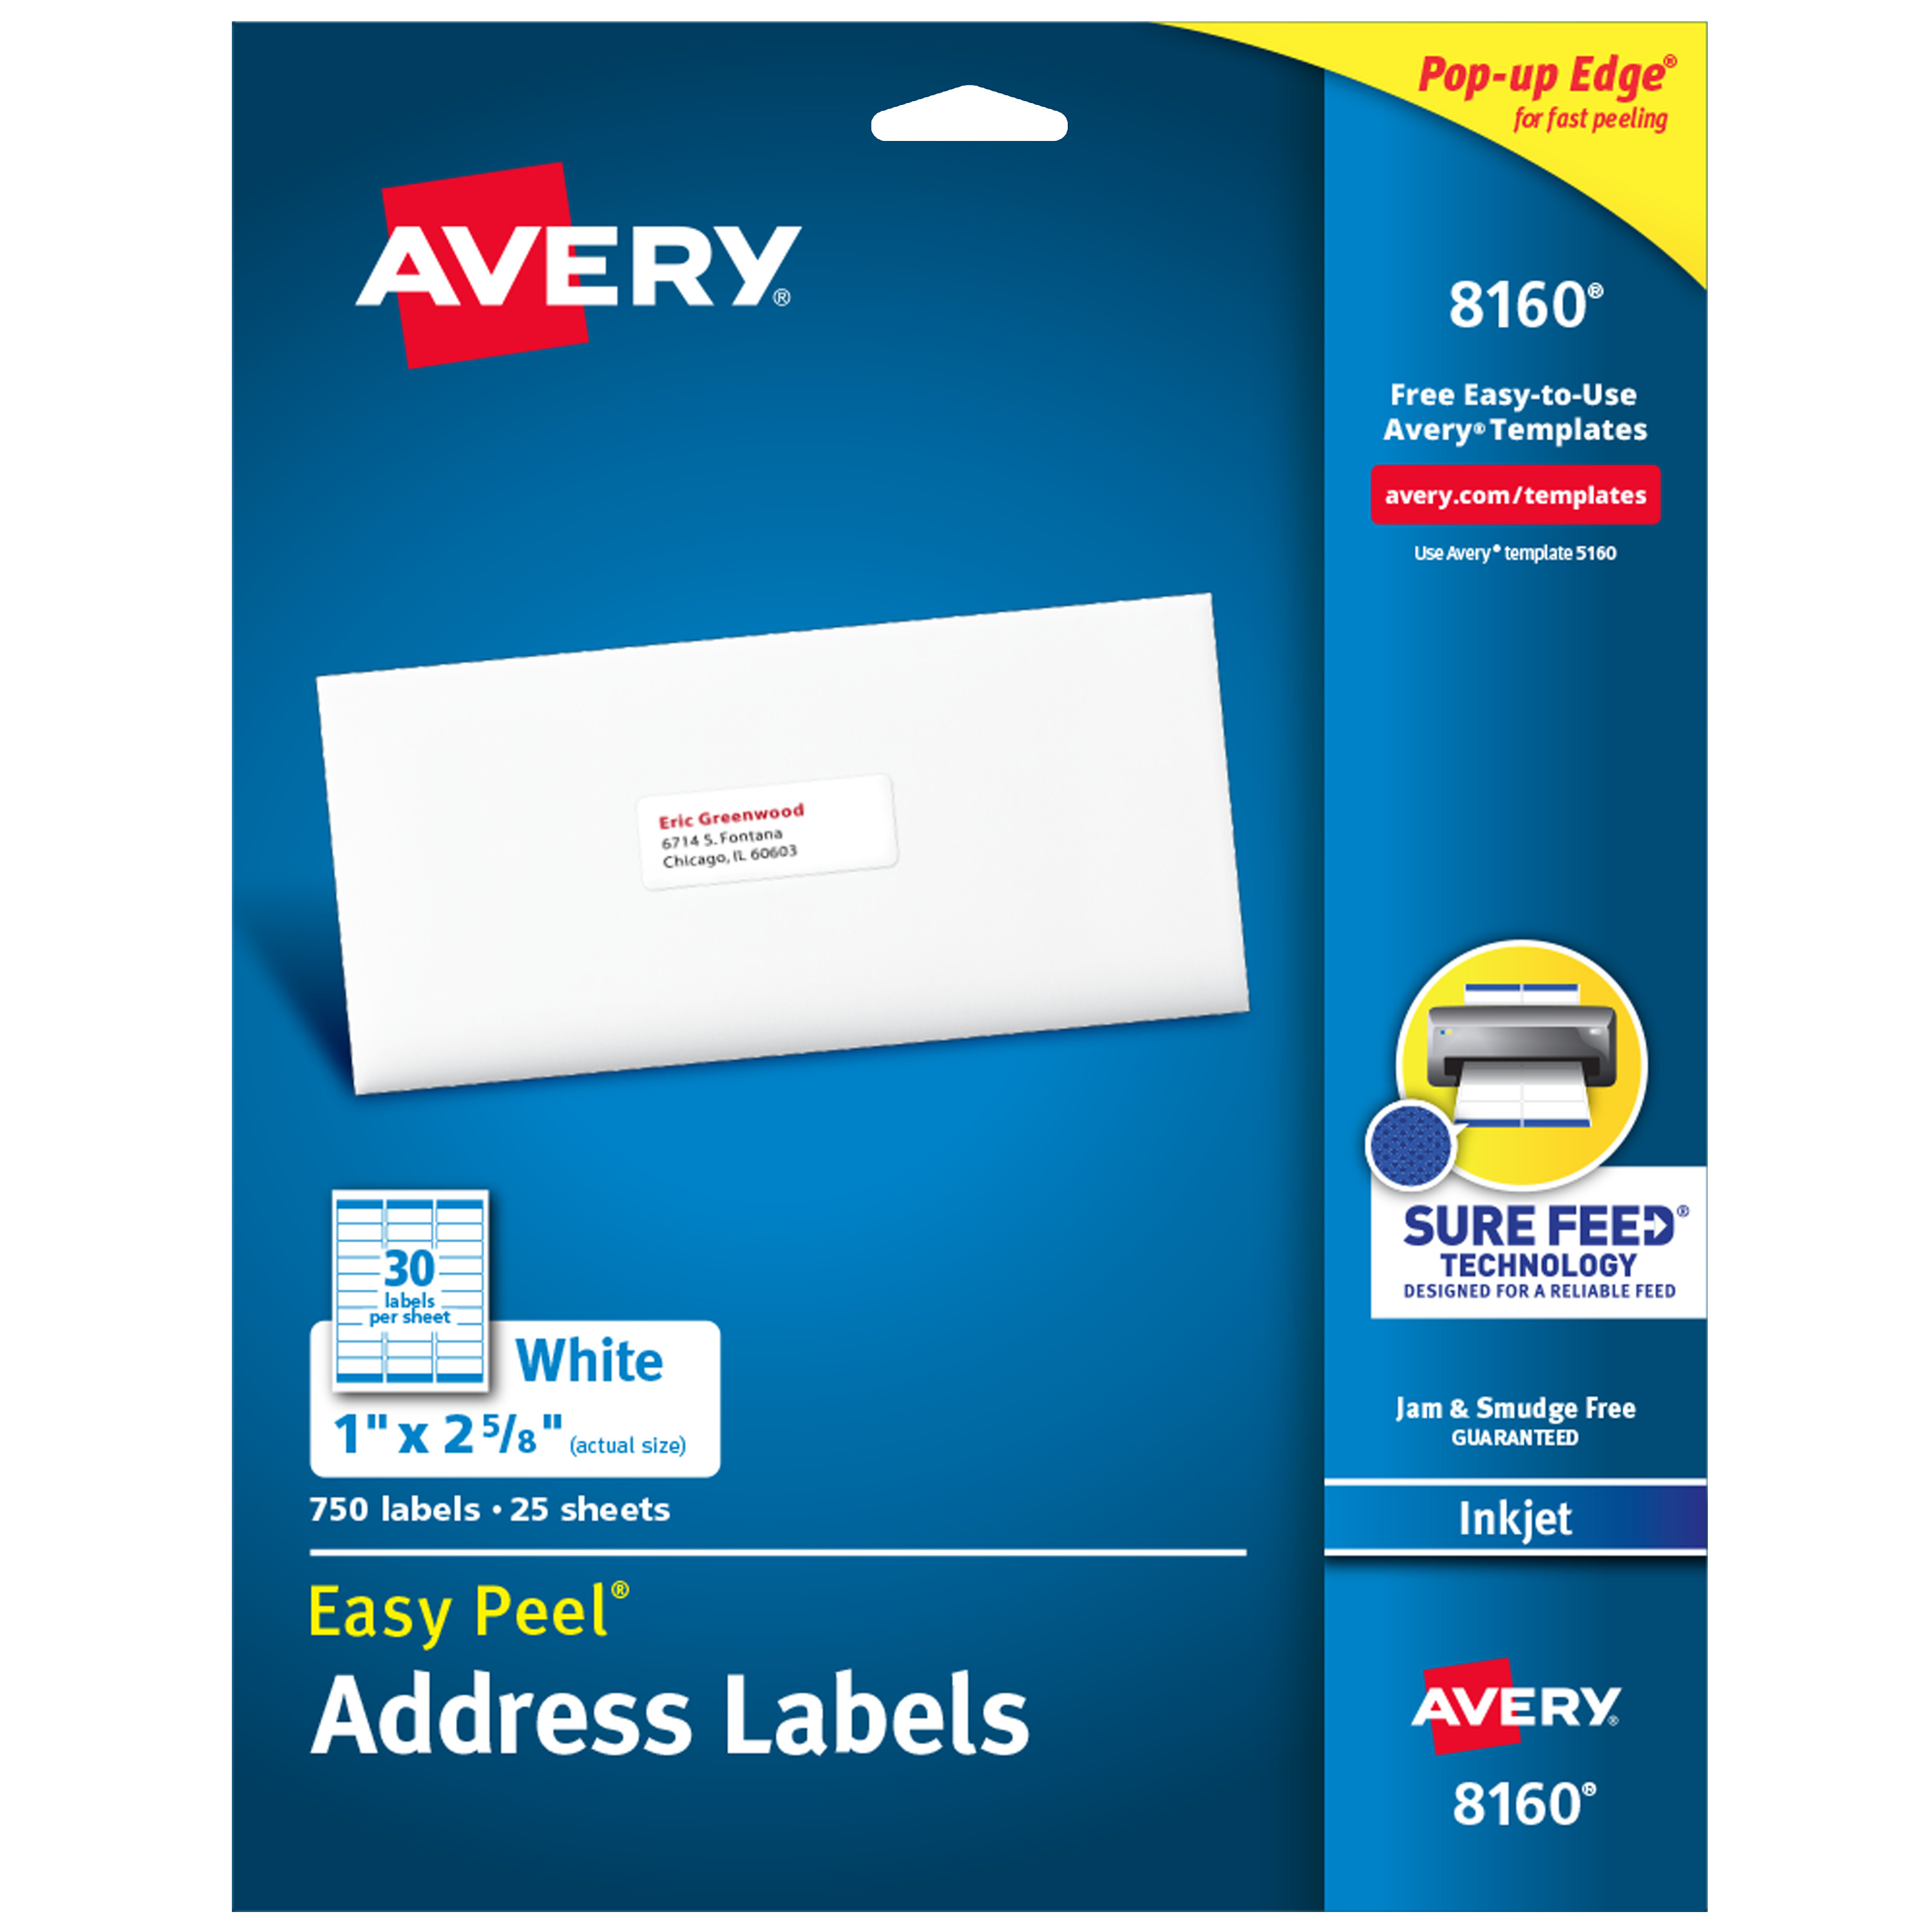 Avery Easy Peel Address Labels, Sure Feed Technology, Permanent Adhesive, 1" x 2-5/8", 750 Labels (8160) - image 1 of 10